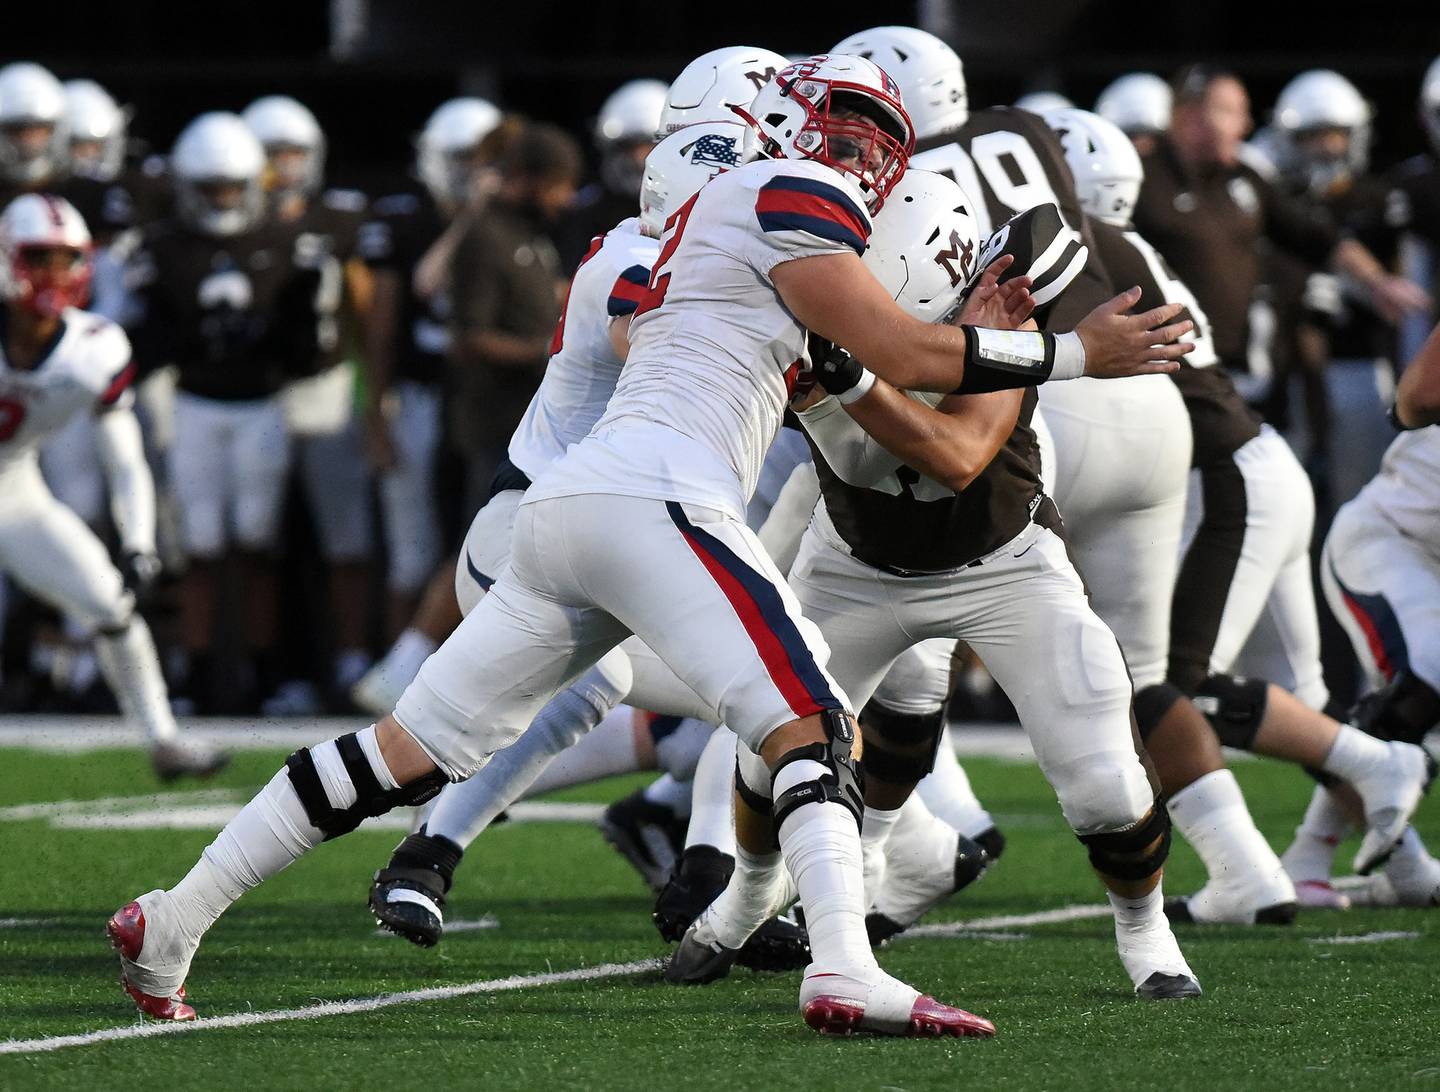 St. Rita's Patrick Farrell (52) tries to put pressure on Mount Carmel during the season opener in Chicago on Friday, August 26, 2022.